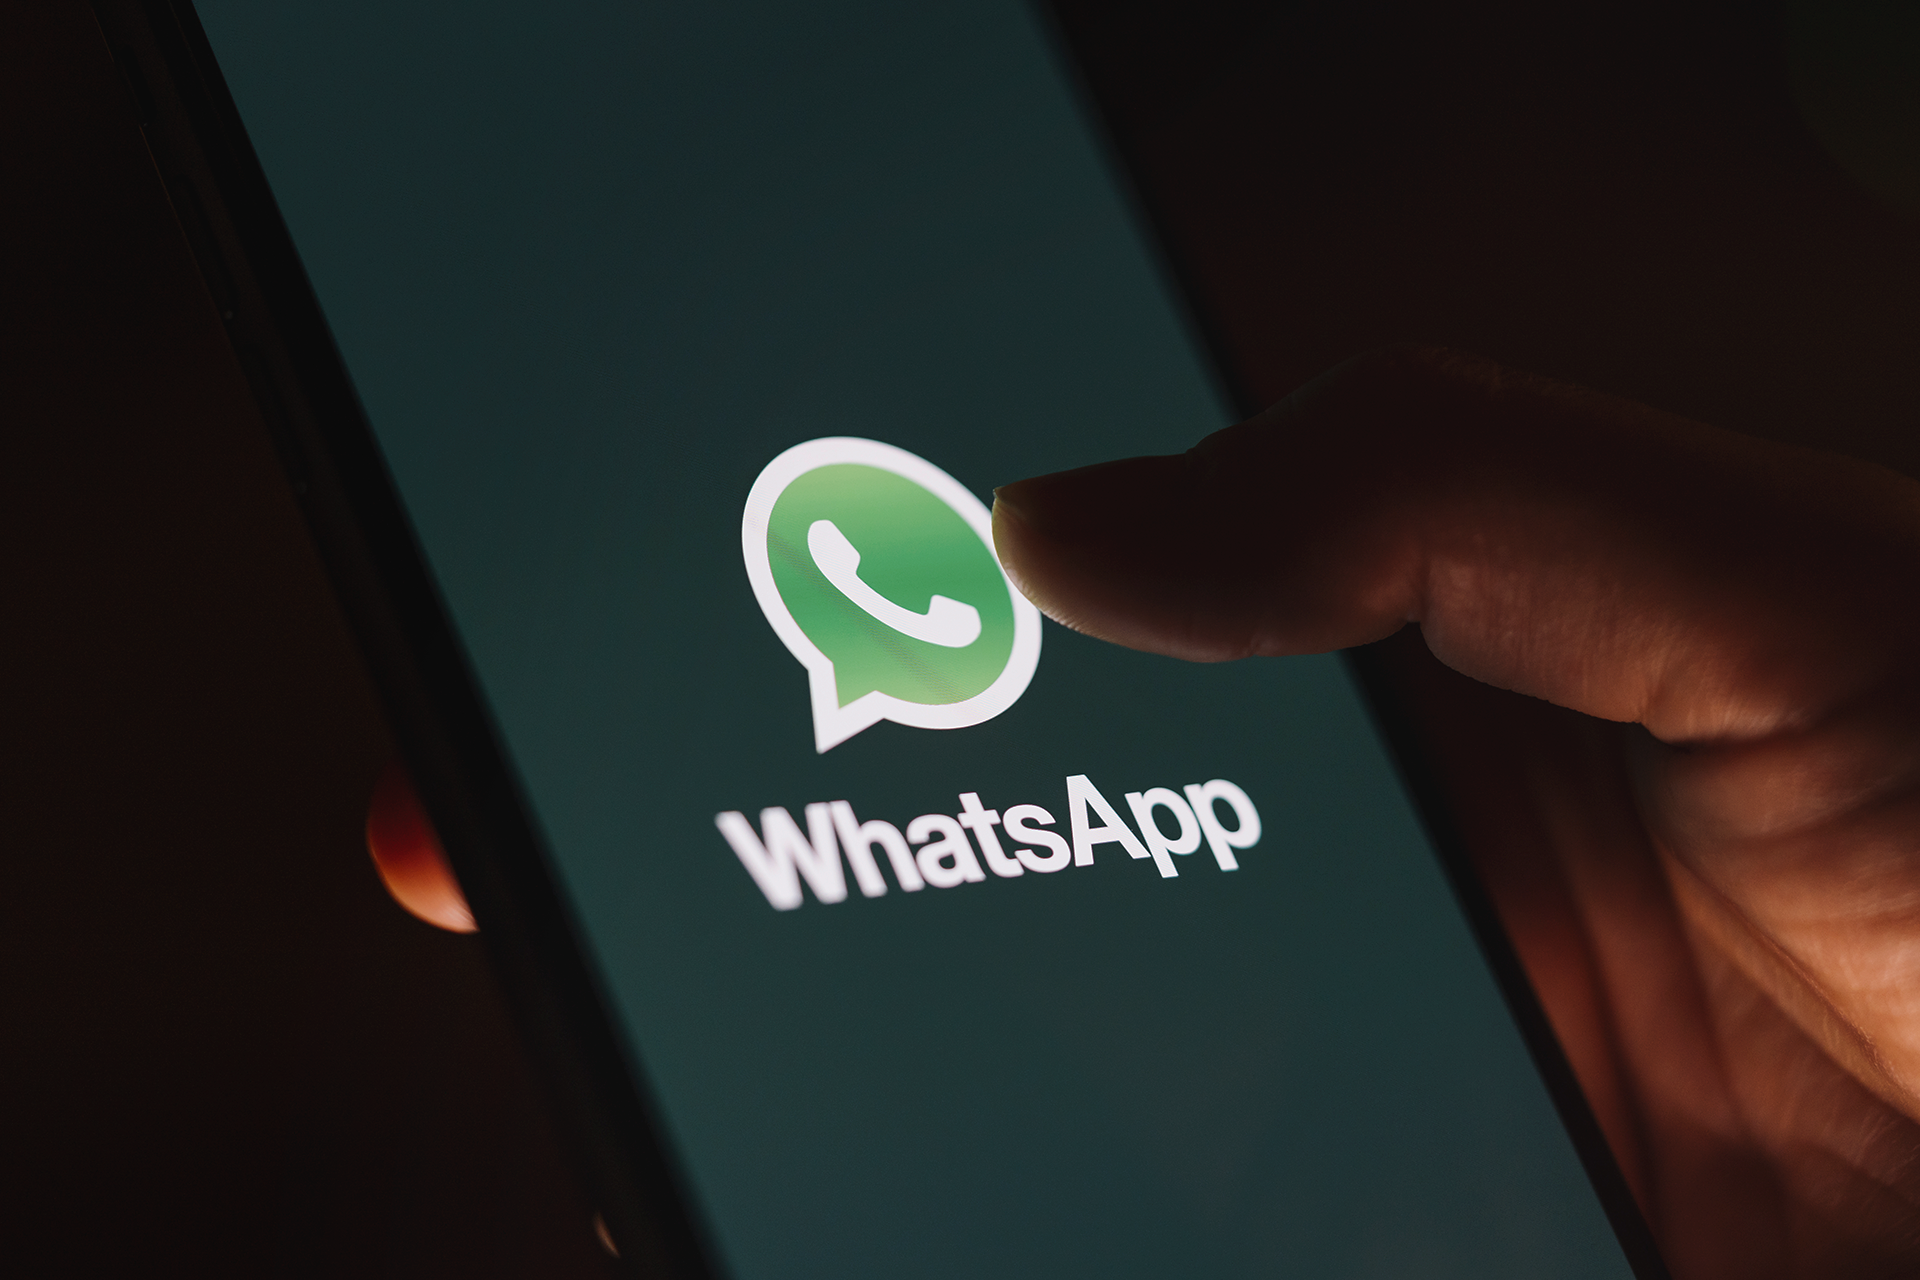 A person holding a cell phone with the WhatsApp logo displayed on screen. This image is being used as the thumbnail for a blog on WhatsApp business marketing